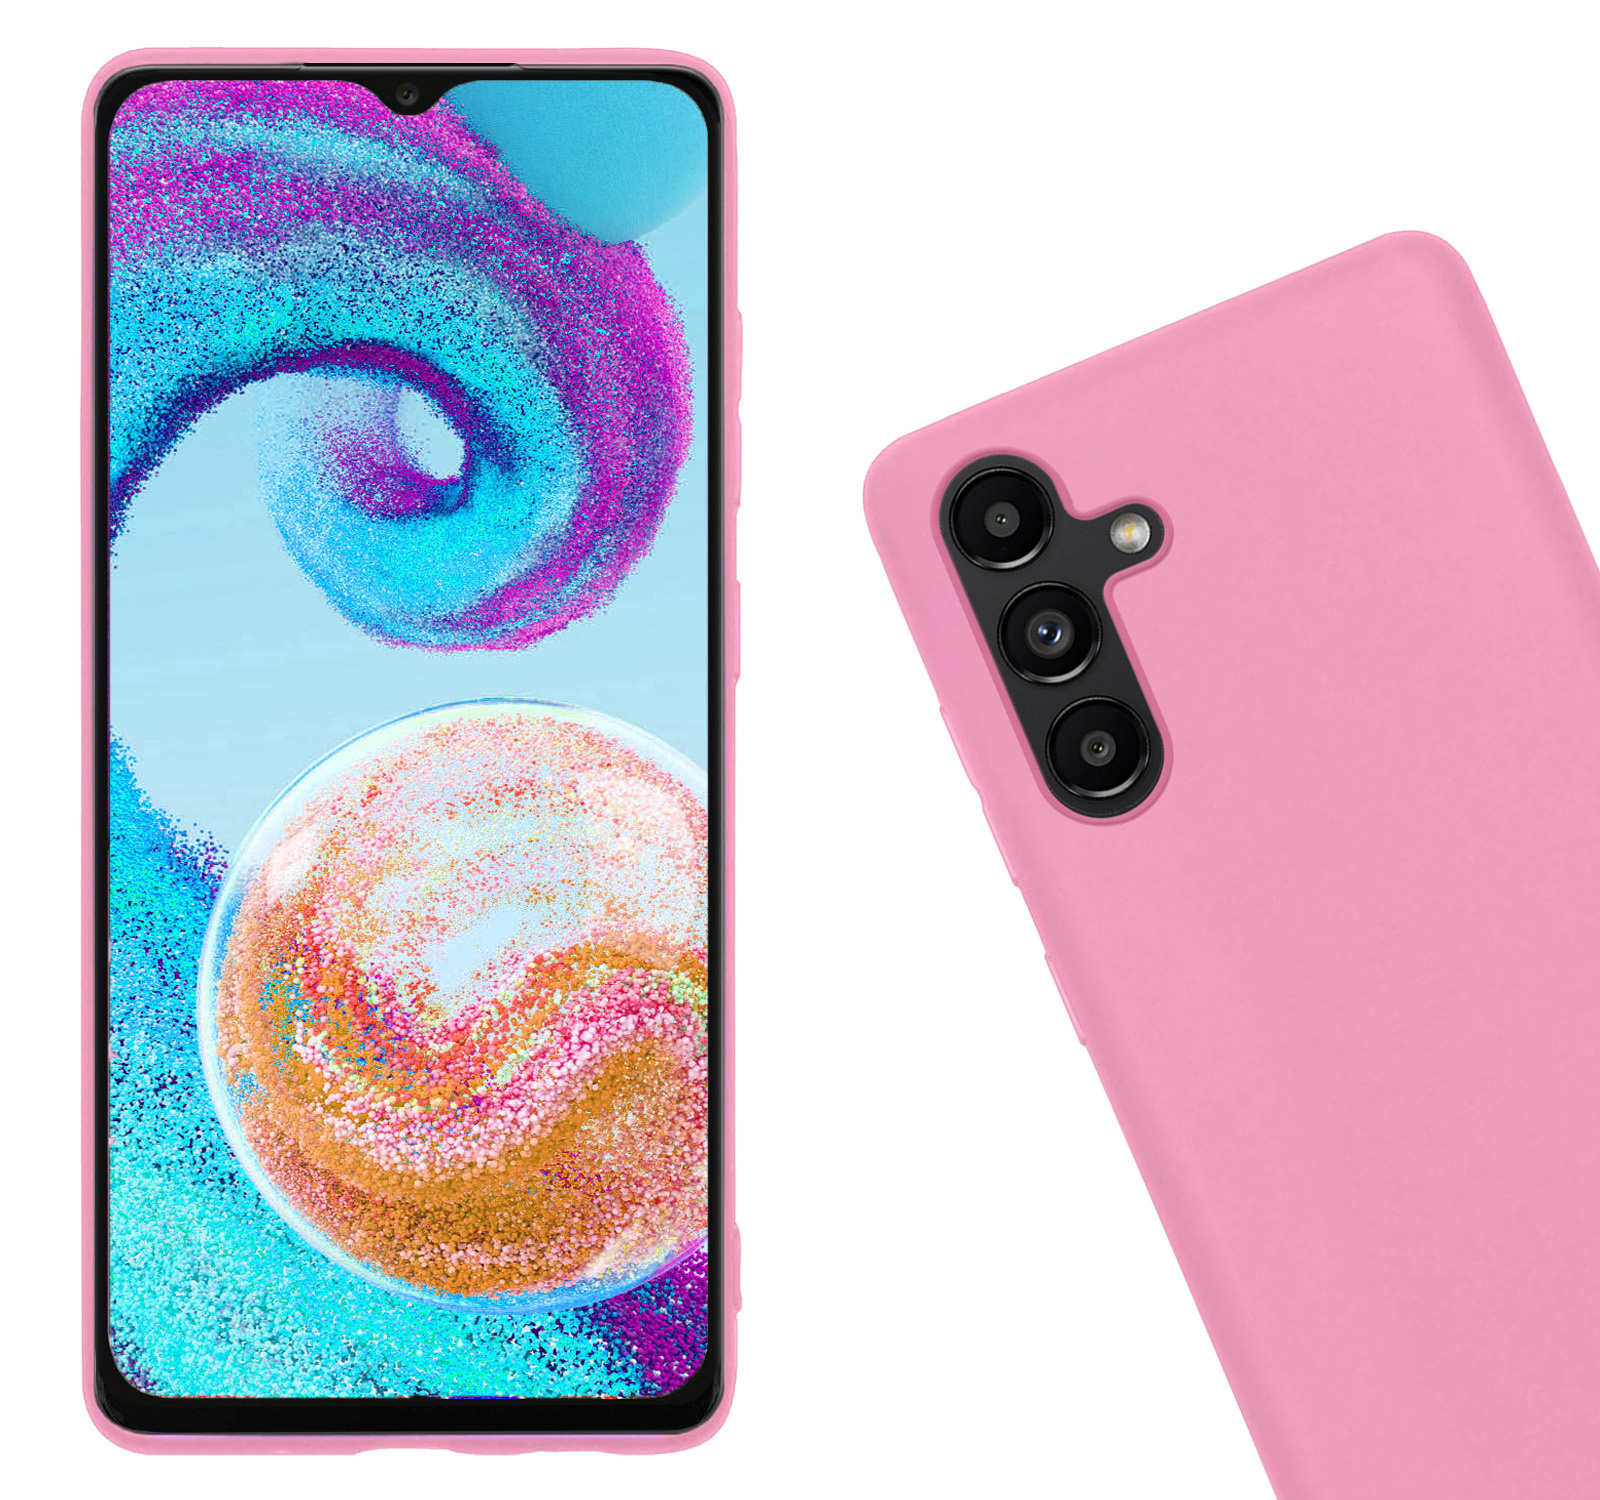 Nomfy Samsung A04s Hoesje Siliconen Case Back Cover Met 2x Screenprotector - Samsung Galaxy A04s Hoes Cover Silicone - Licht Roze